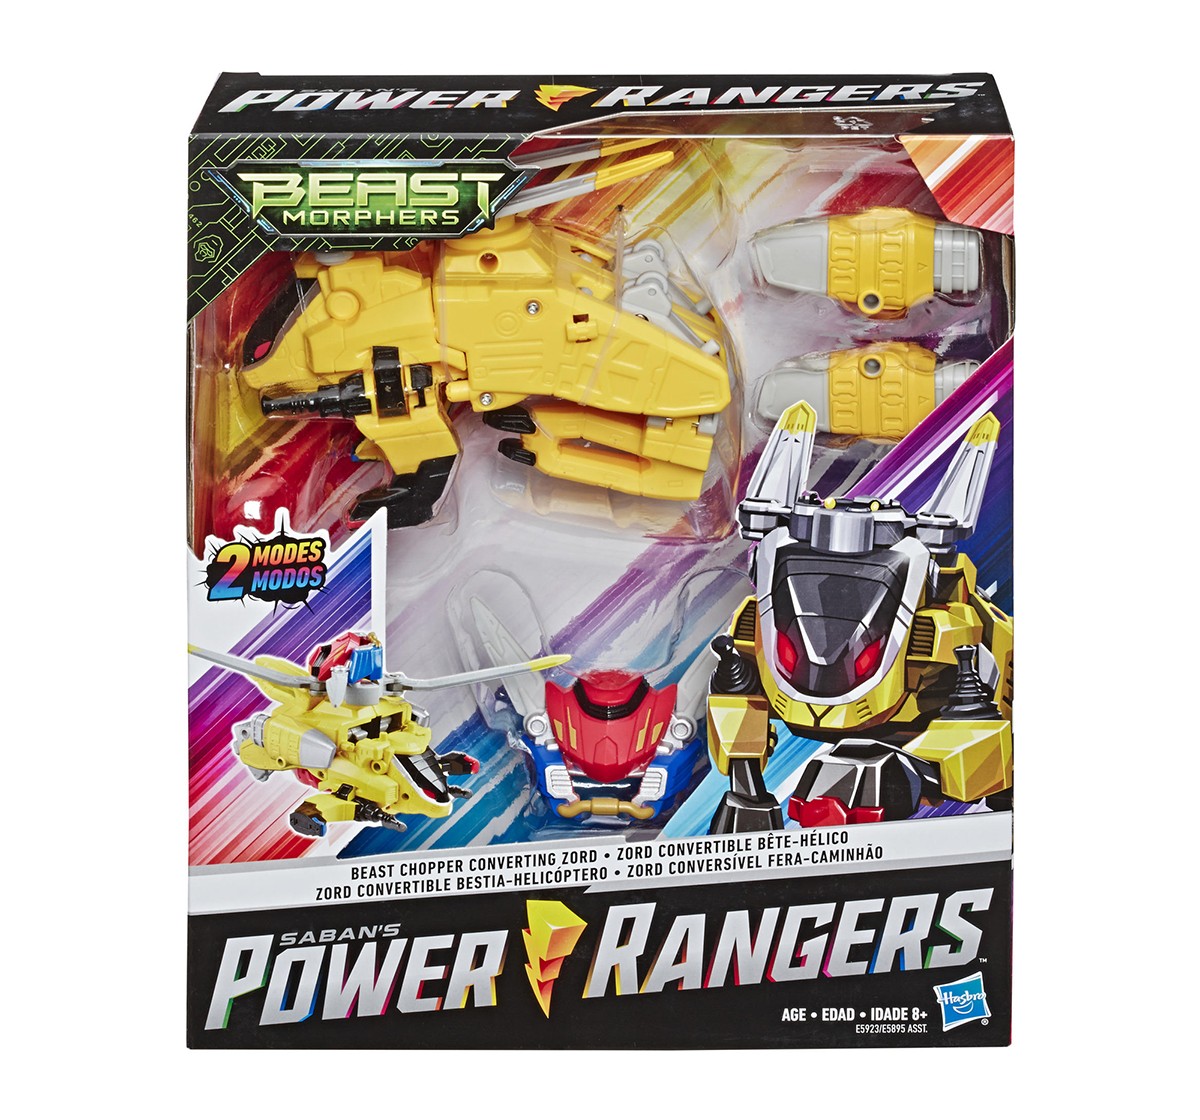 Power Rangers Beast Morphers Converting Zord Assorted Action Figures for Kids age 8Y+ 